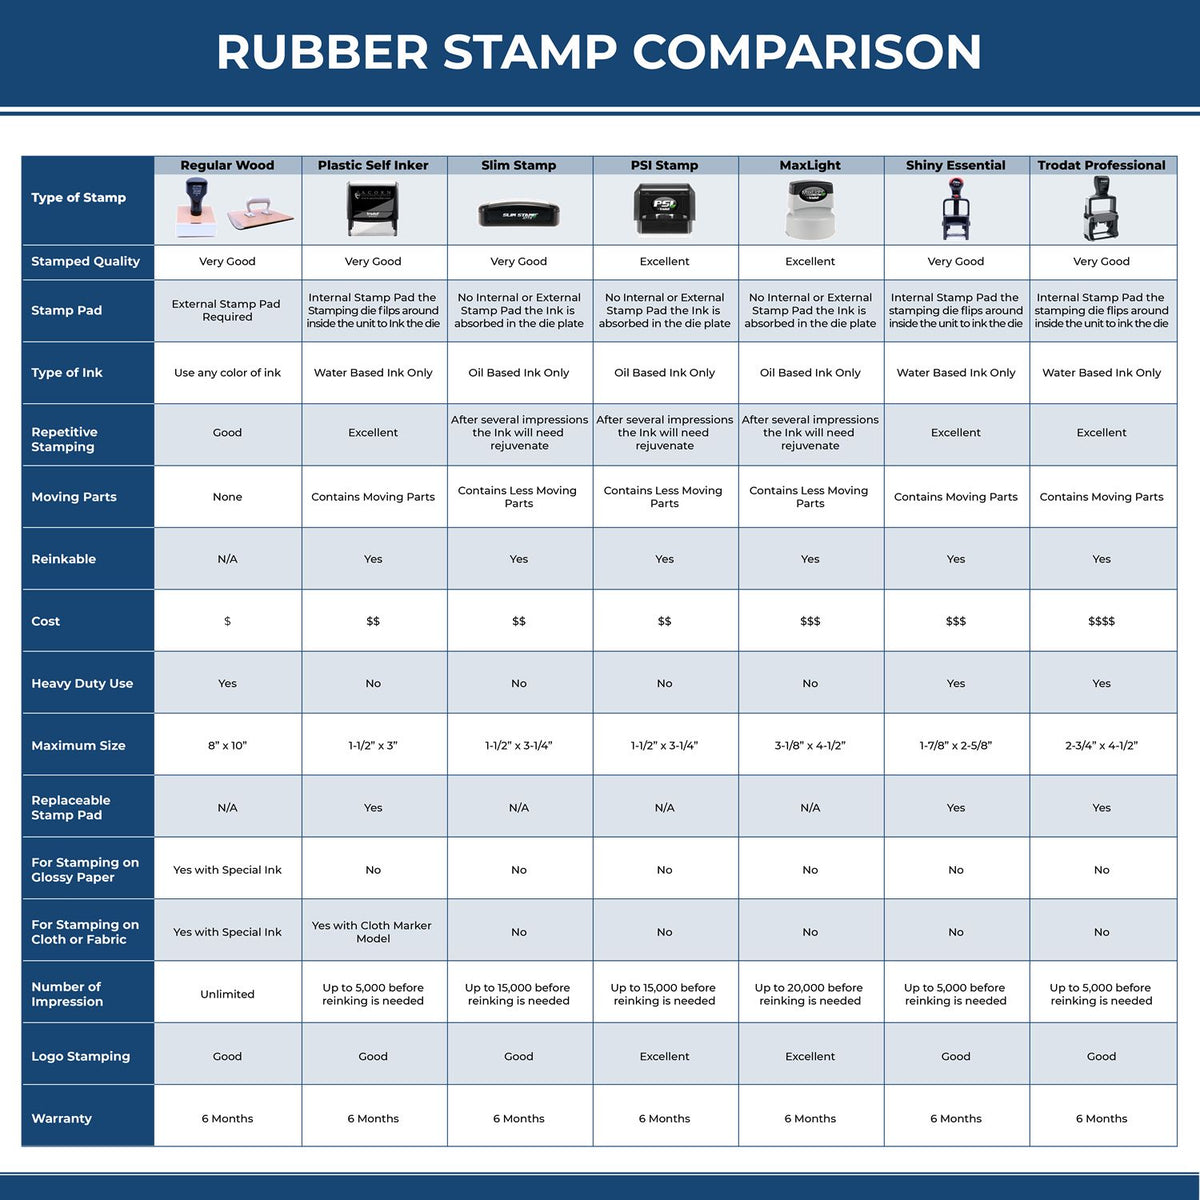 A comparison chart for the different types of mount models available for the Wooden Handle Washington Rectangular Notary Public Stamp.